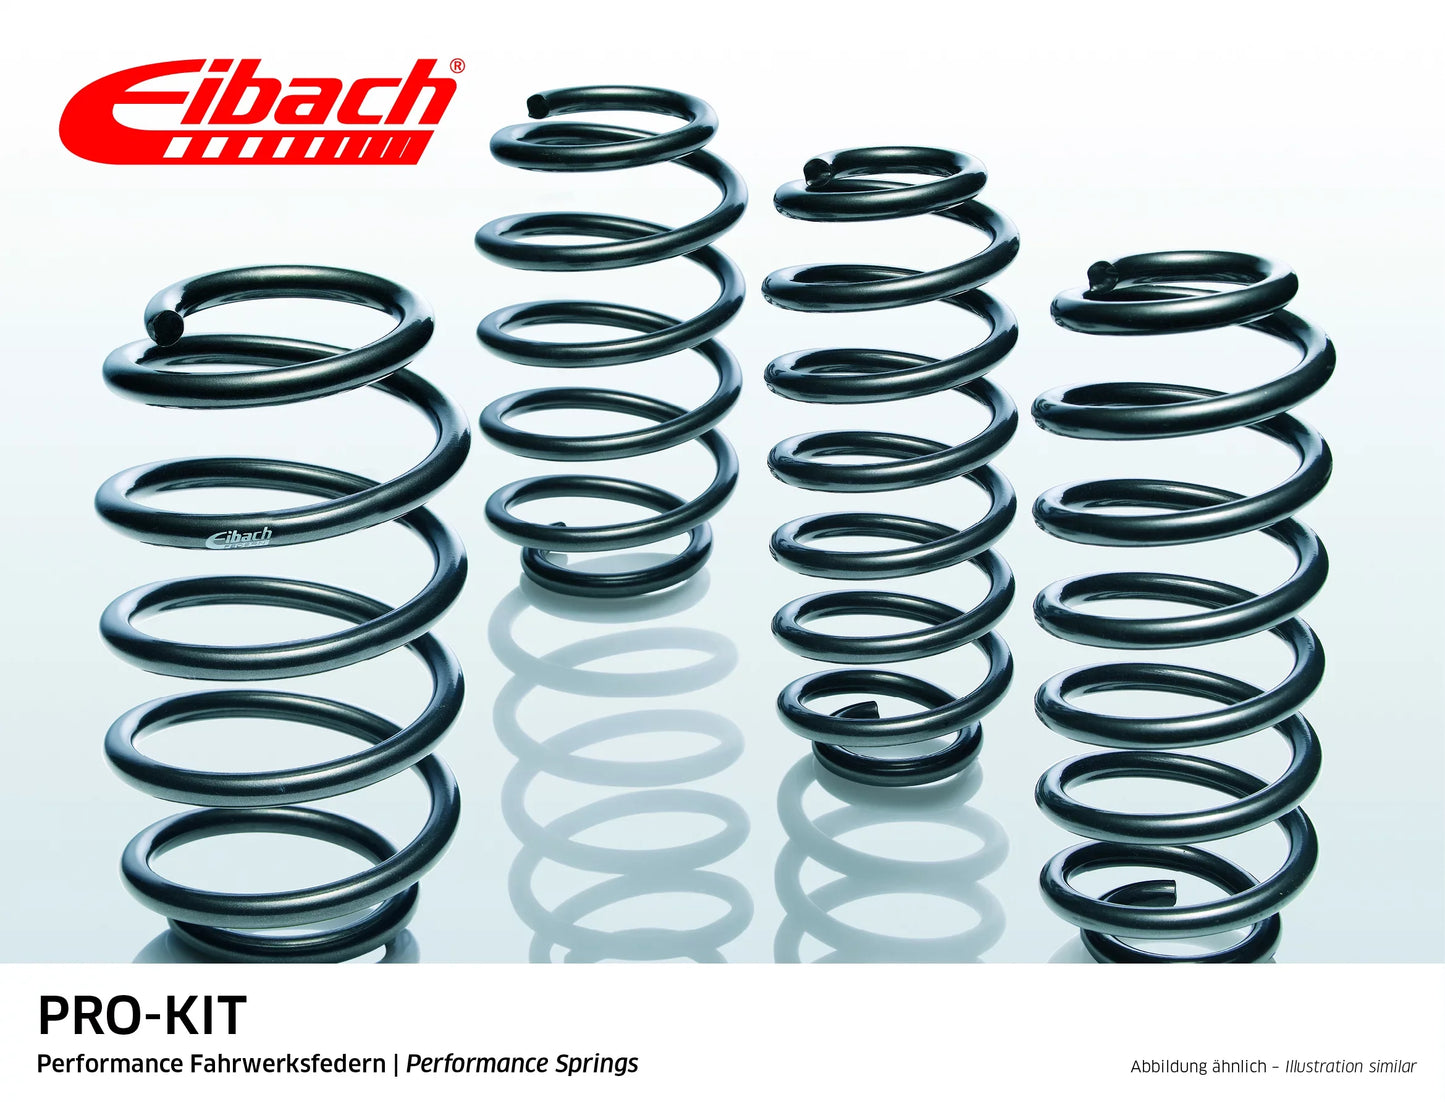 Eibach Pro-Kit Lowering Springs (E10-15-021-02-22) at £243.07